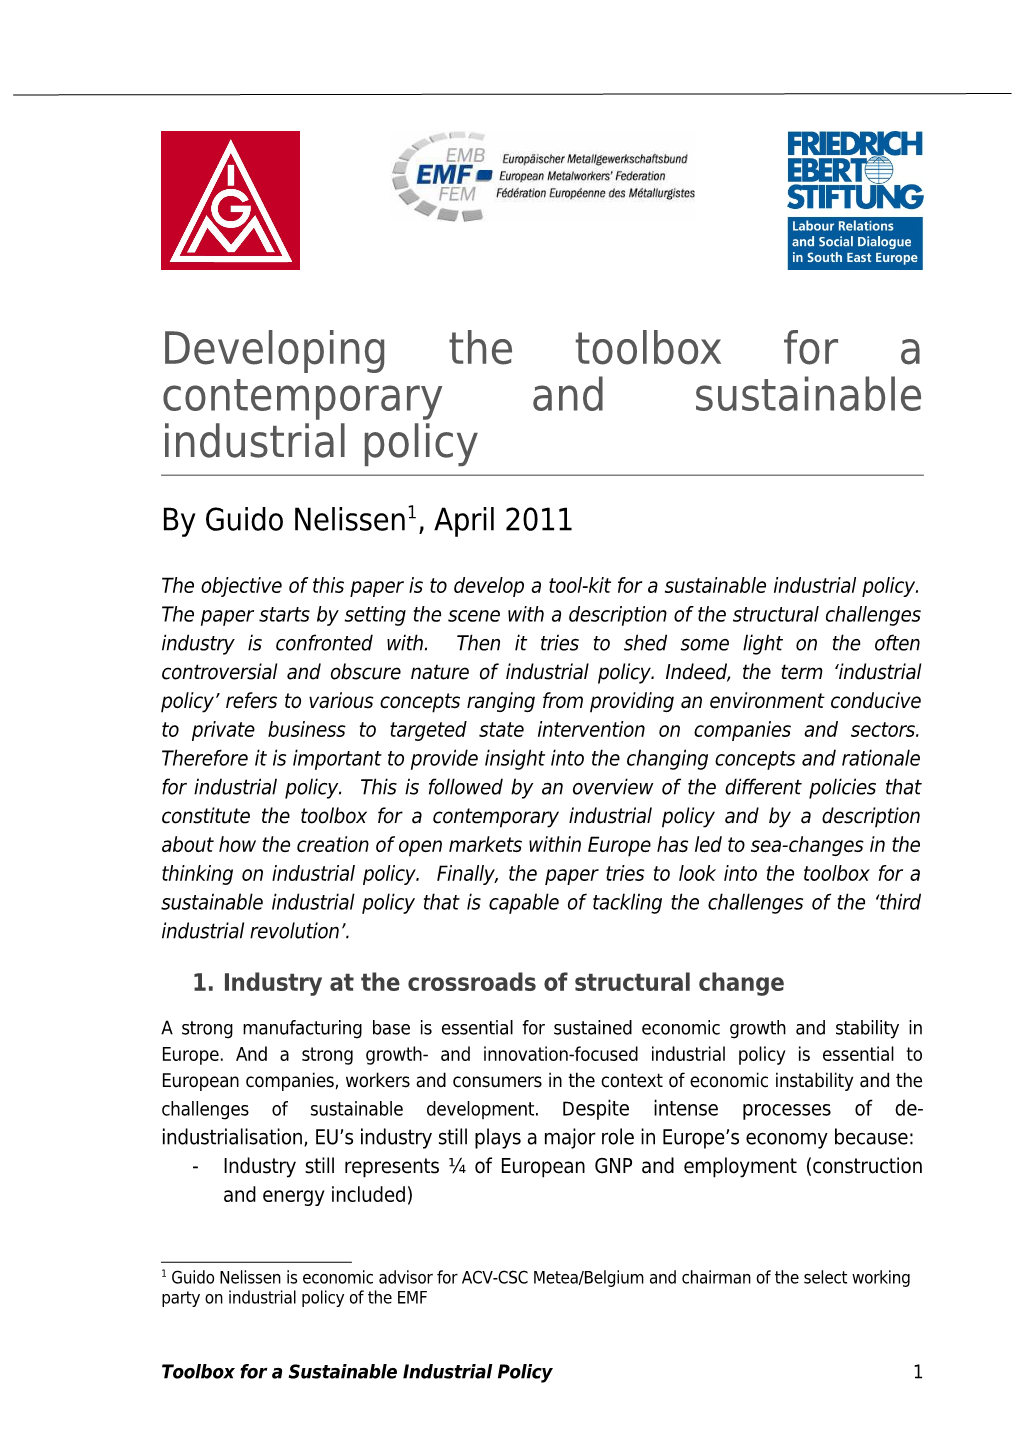 Developing the Toolbox for a Contemporary and Sustainable Industrial Policy